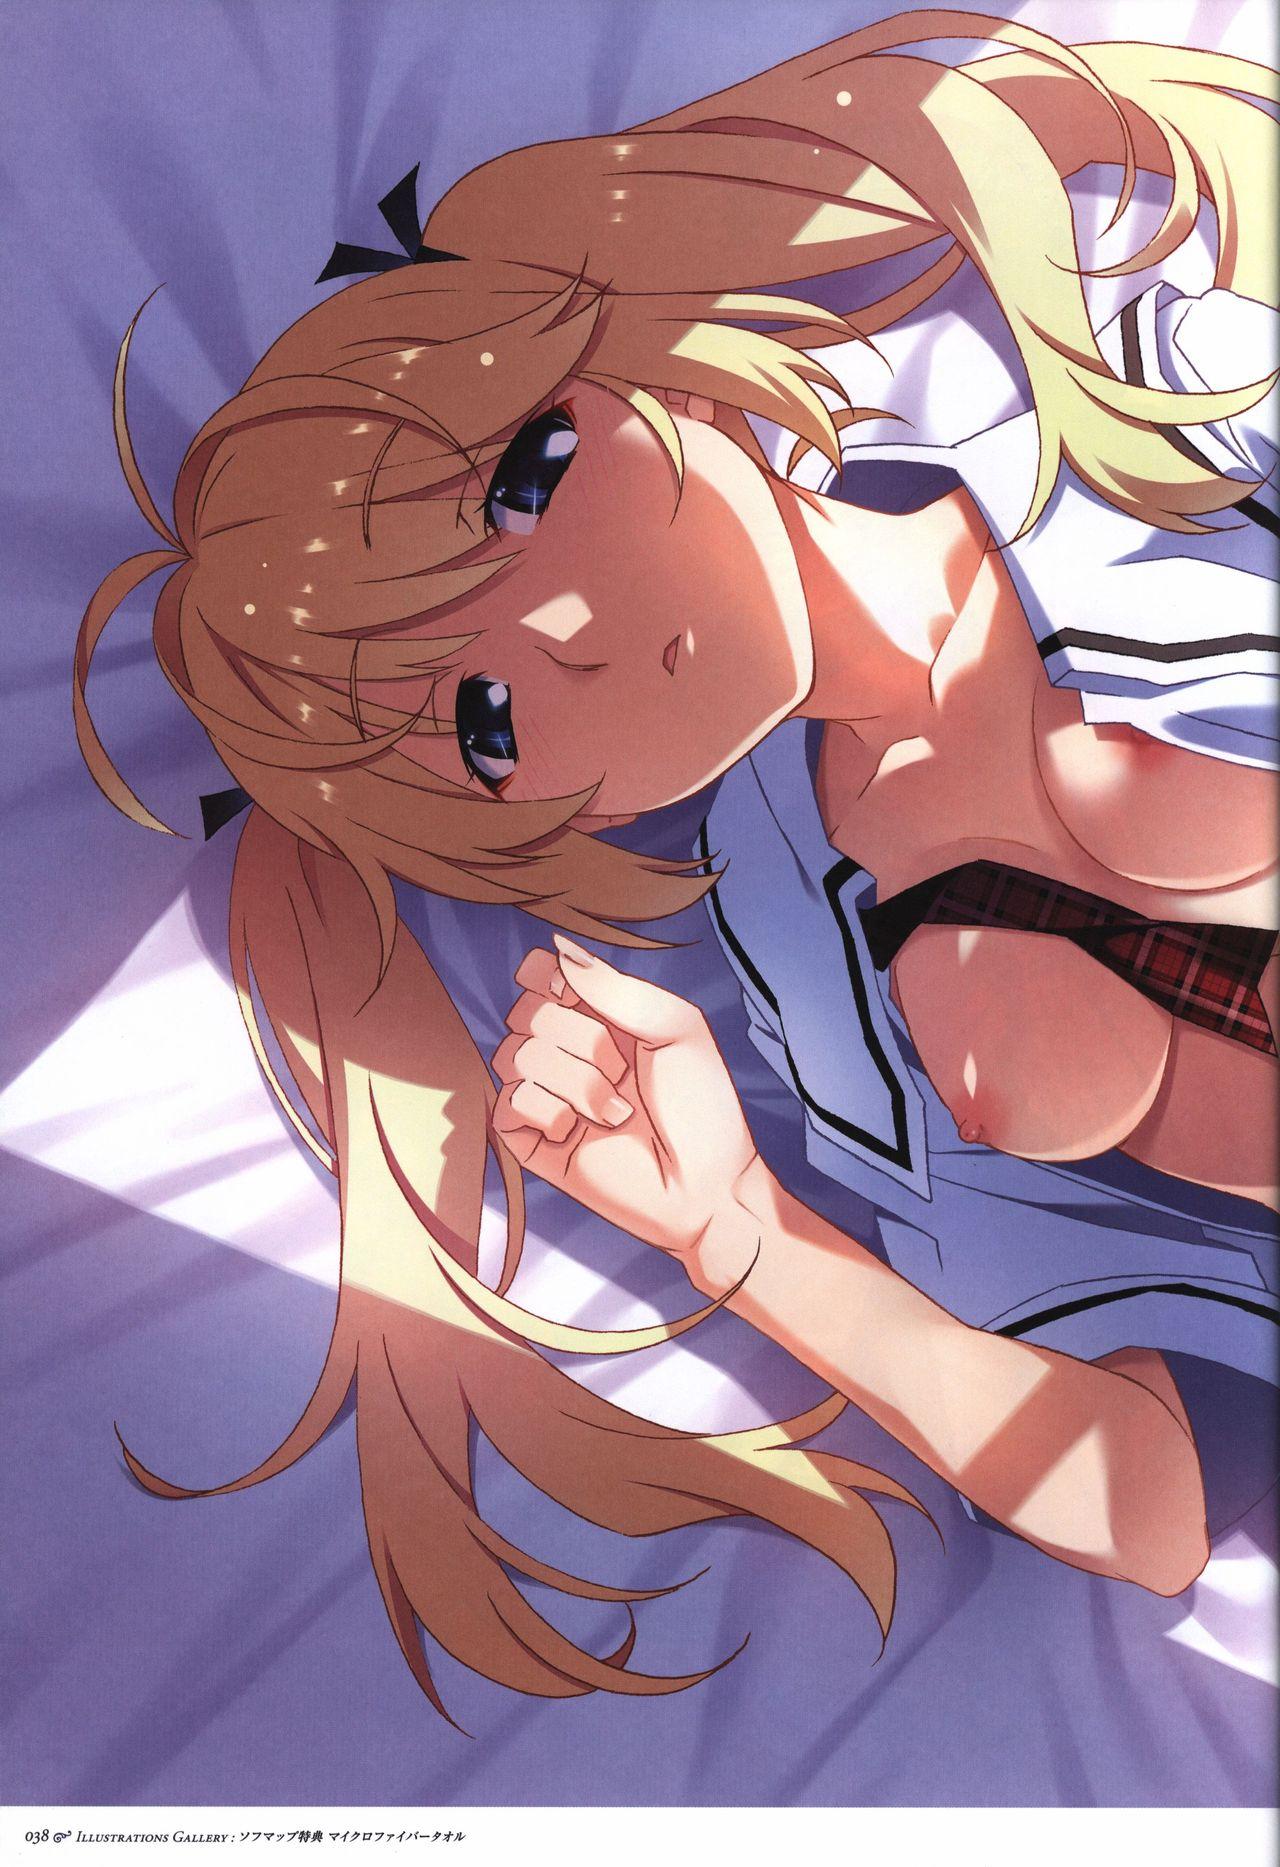 The Fruit of Grisaia Visual FanBook 38